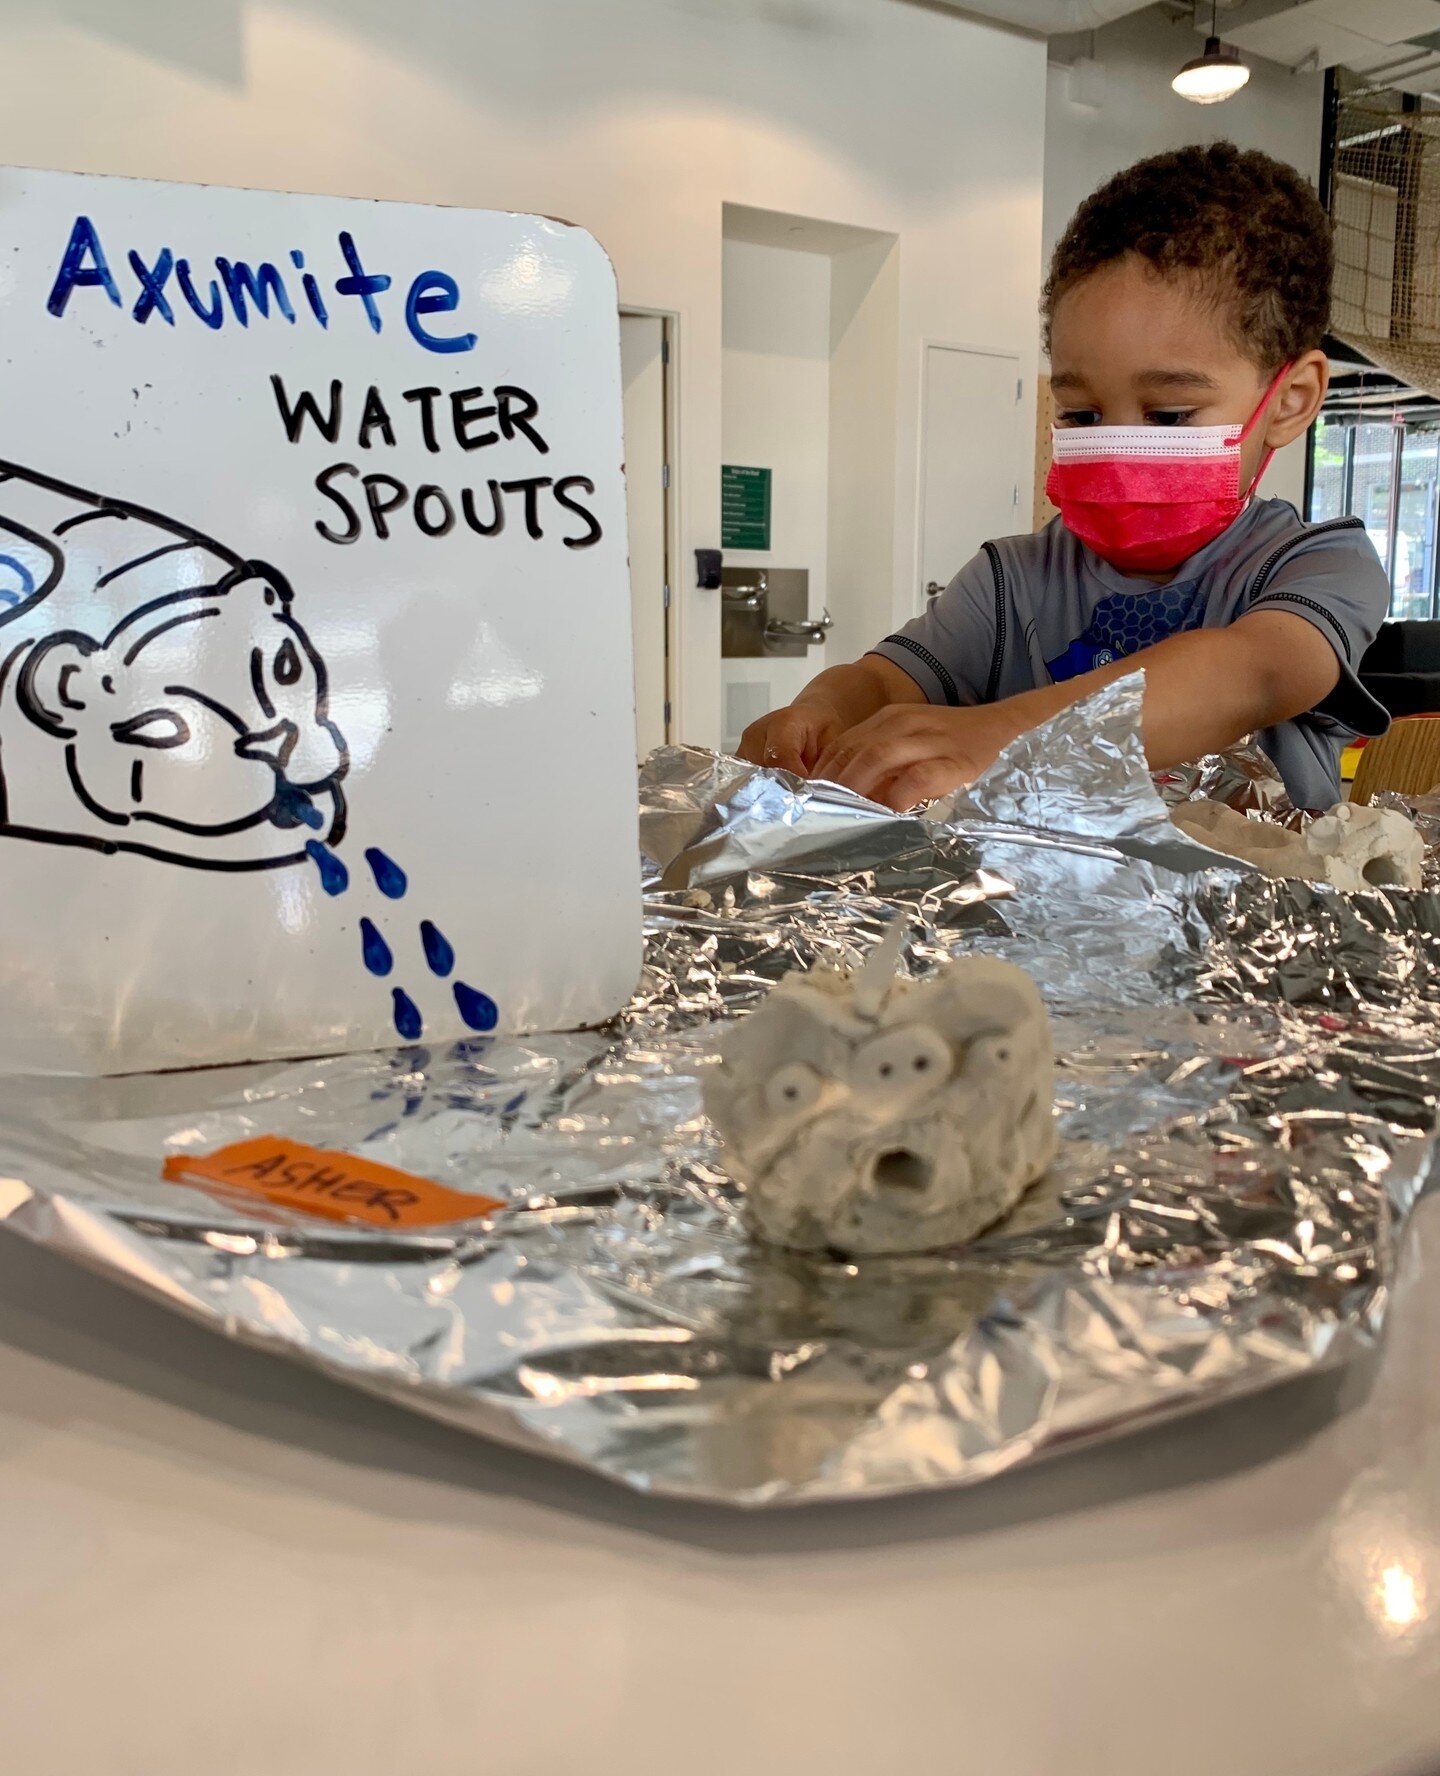 This is an axumite water spout and was an activity that was in our kid-O kit that focused on Ancient Africa. ⁠
⁠
This was how the Ethiopians used to filter water. It's gray clay, cheesecloth and foil. It's a very simple but effective science experime